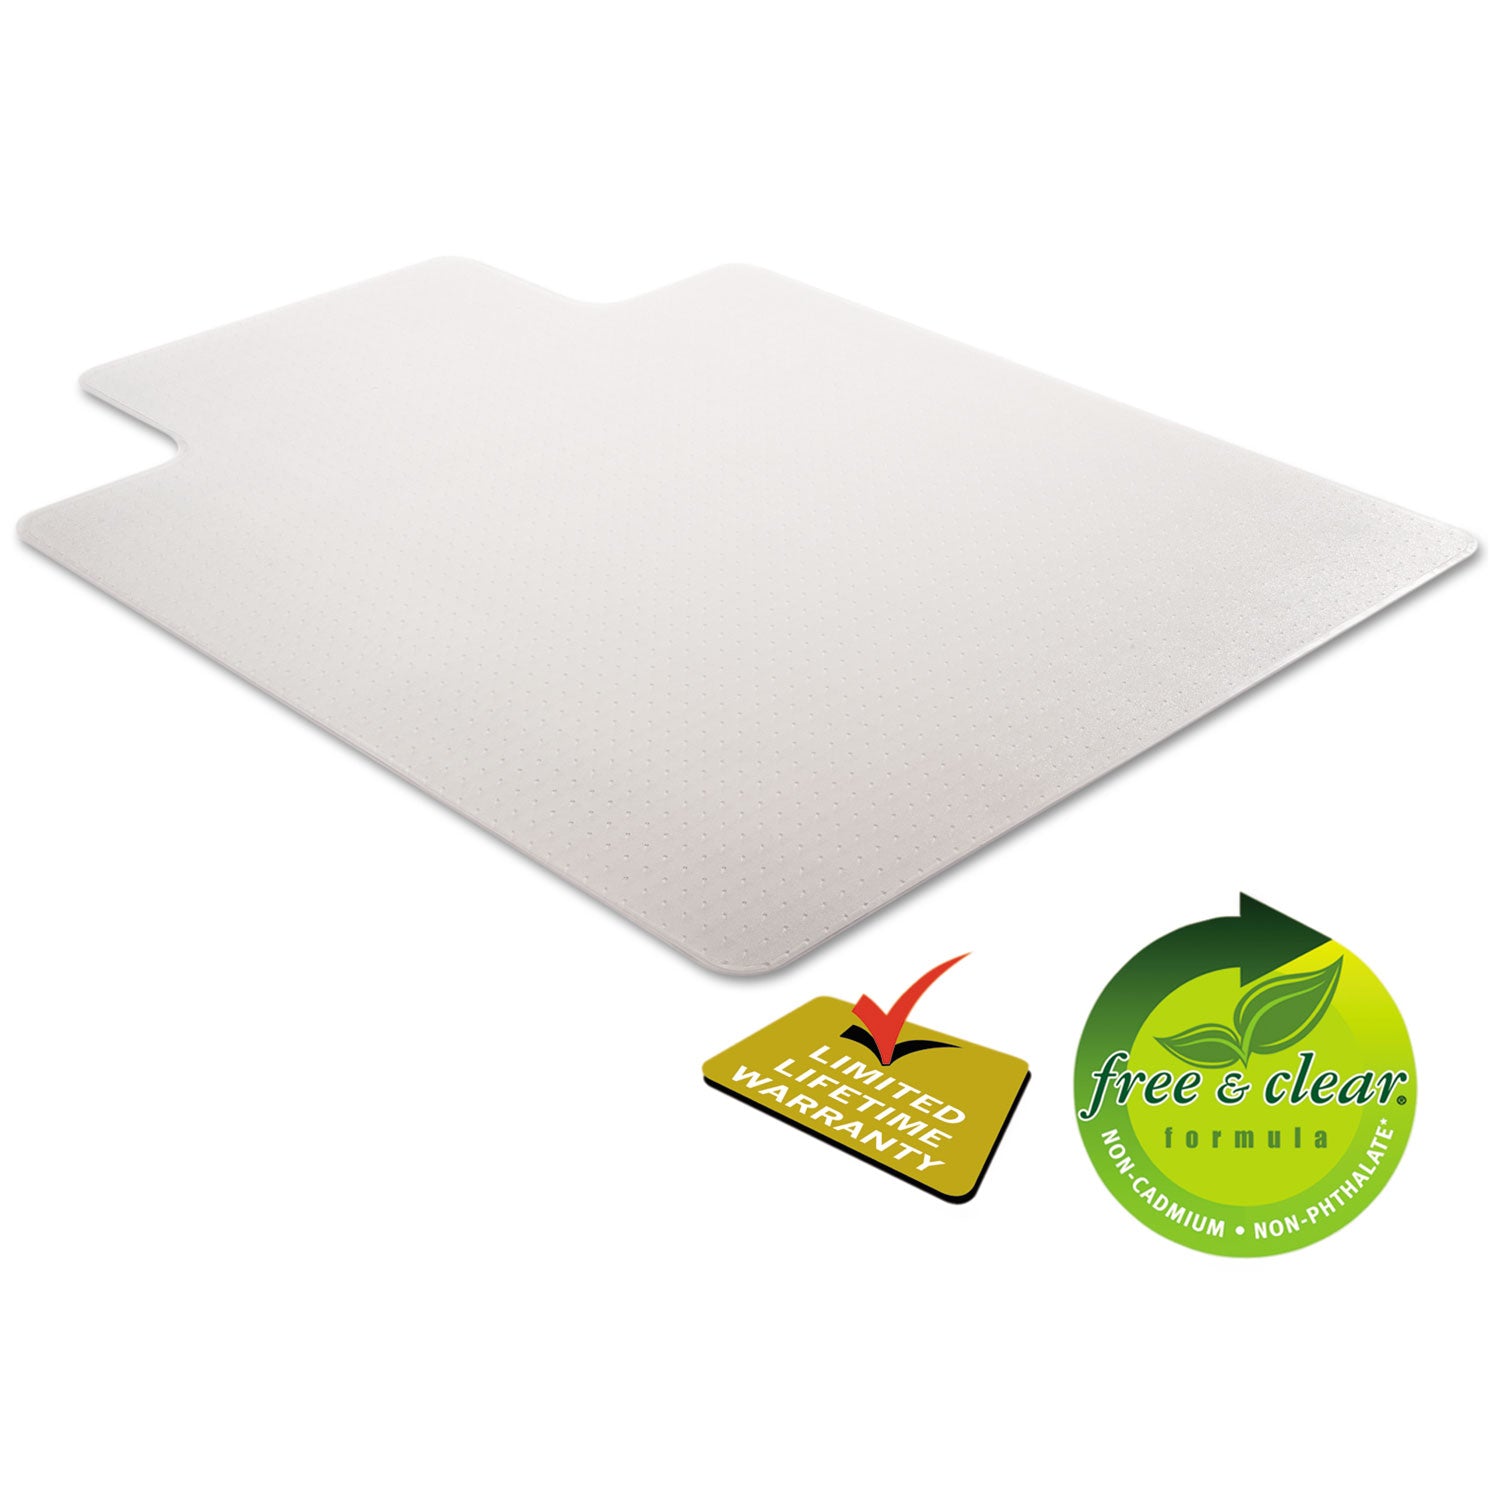 DuraMat Moderate Use Chair Mat for Low Pile Carpet, 46 x 60, Wide Lipped, Clear - 5